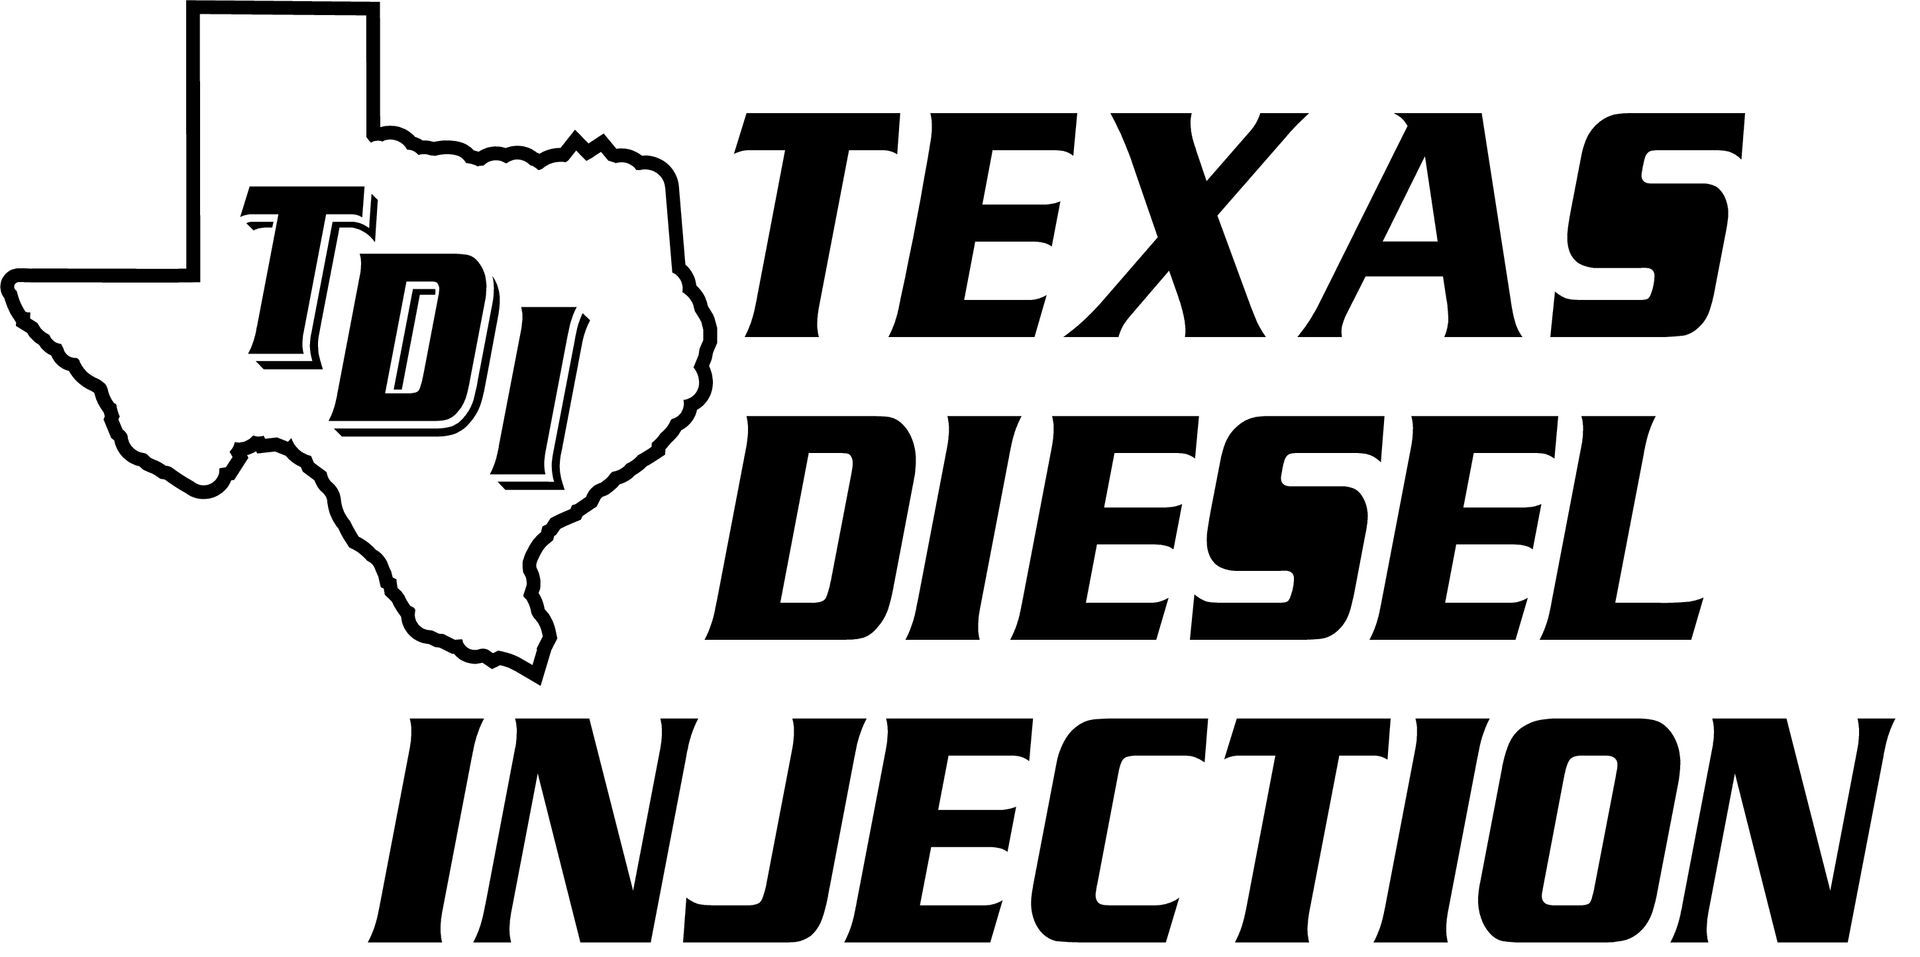 Texas Diesel Injection